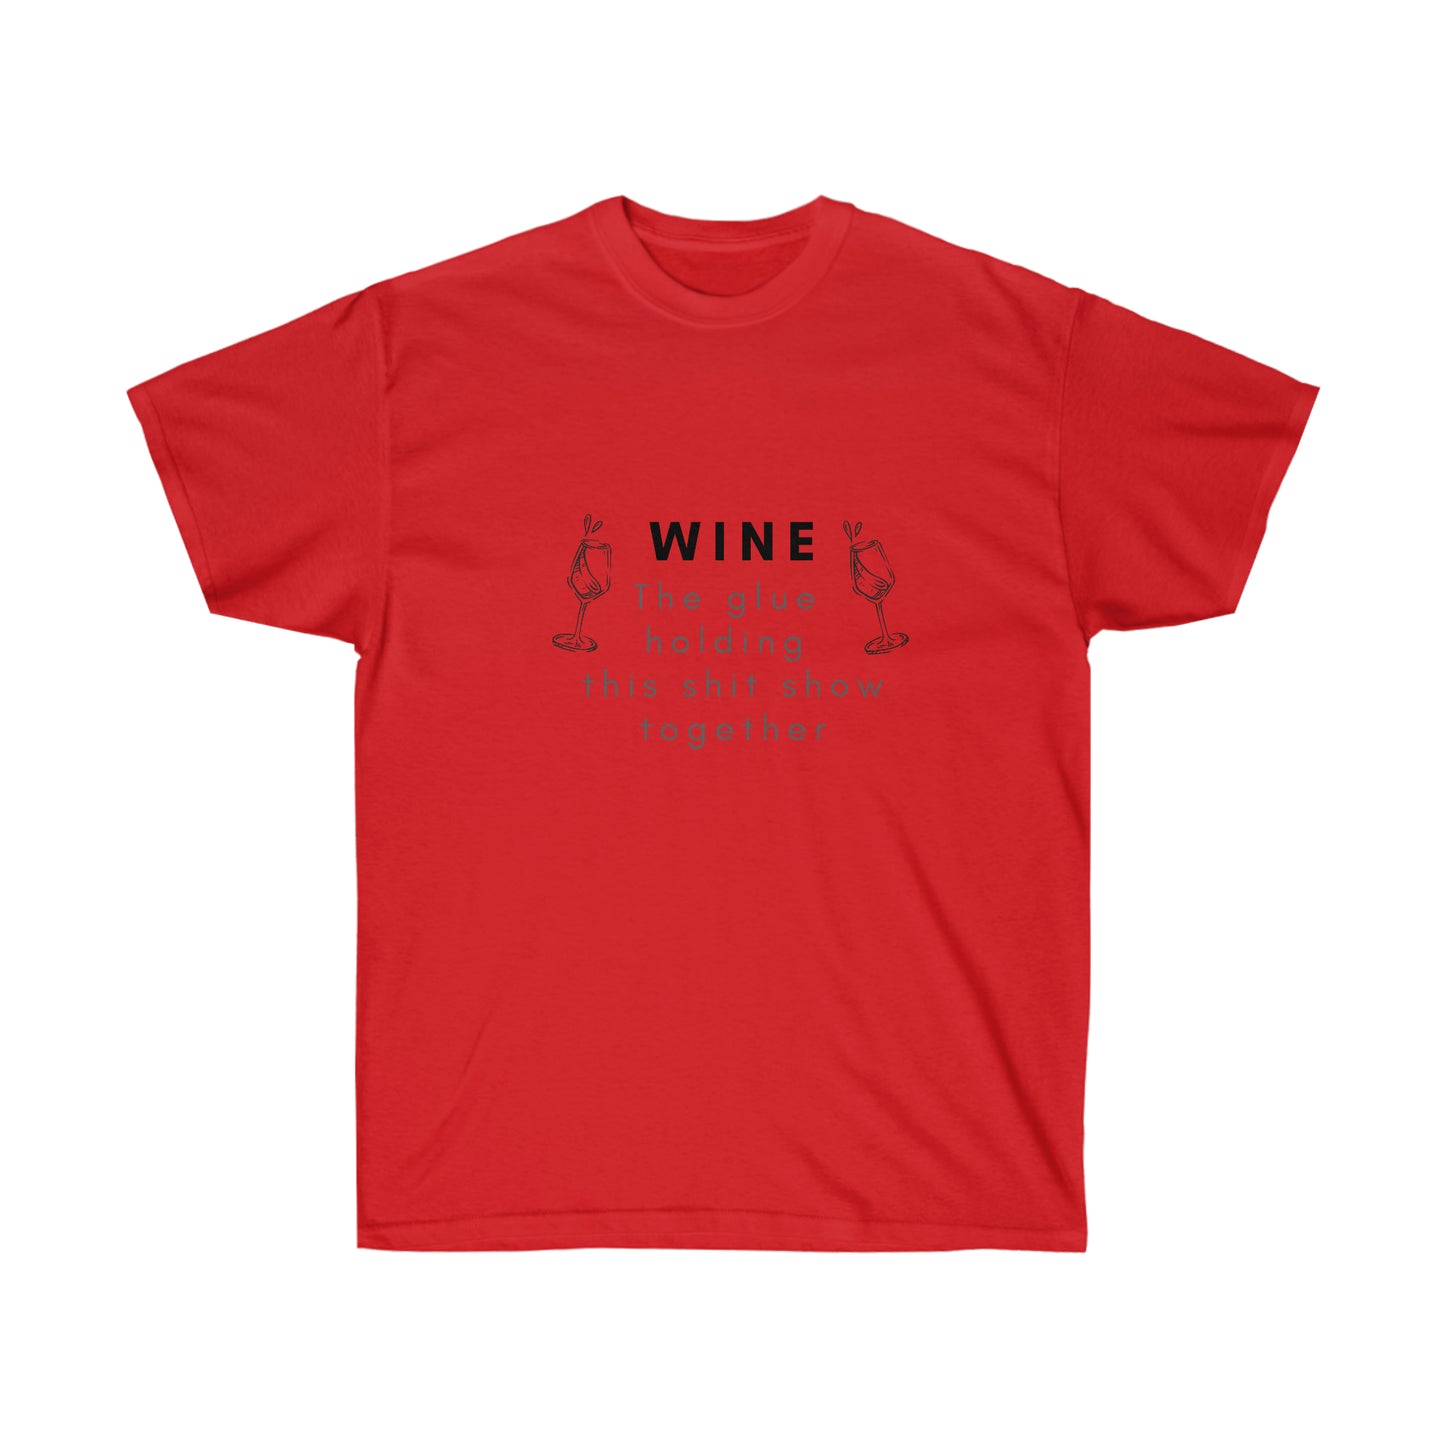 Wine the Glue Holding this Shit Show Together Unisex Ultra Cotton Tee